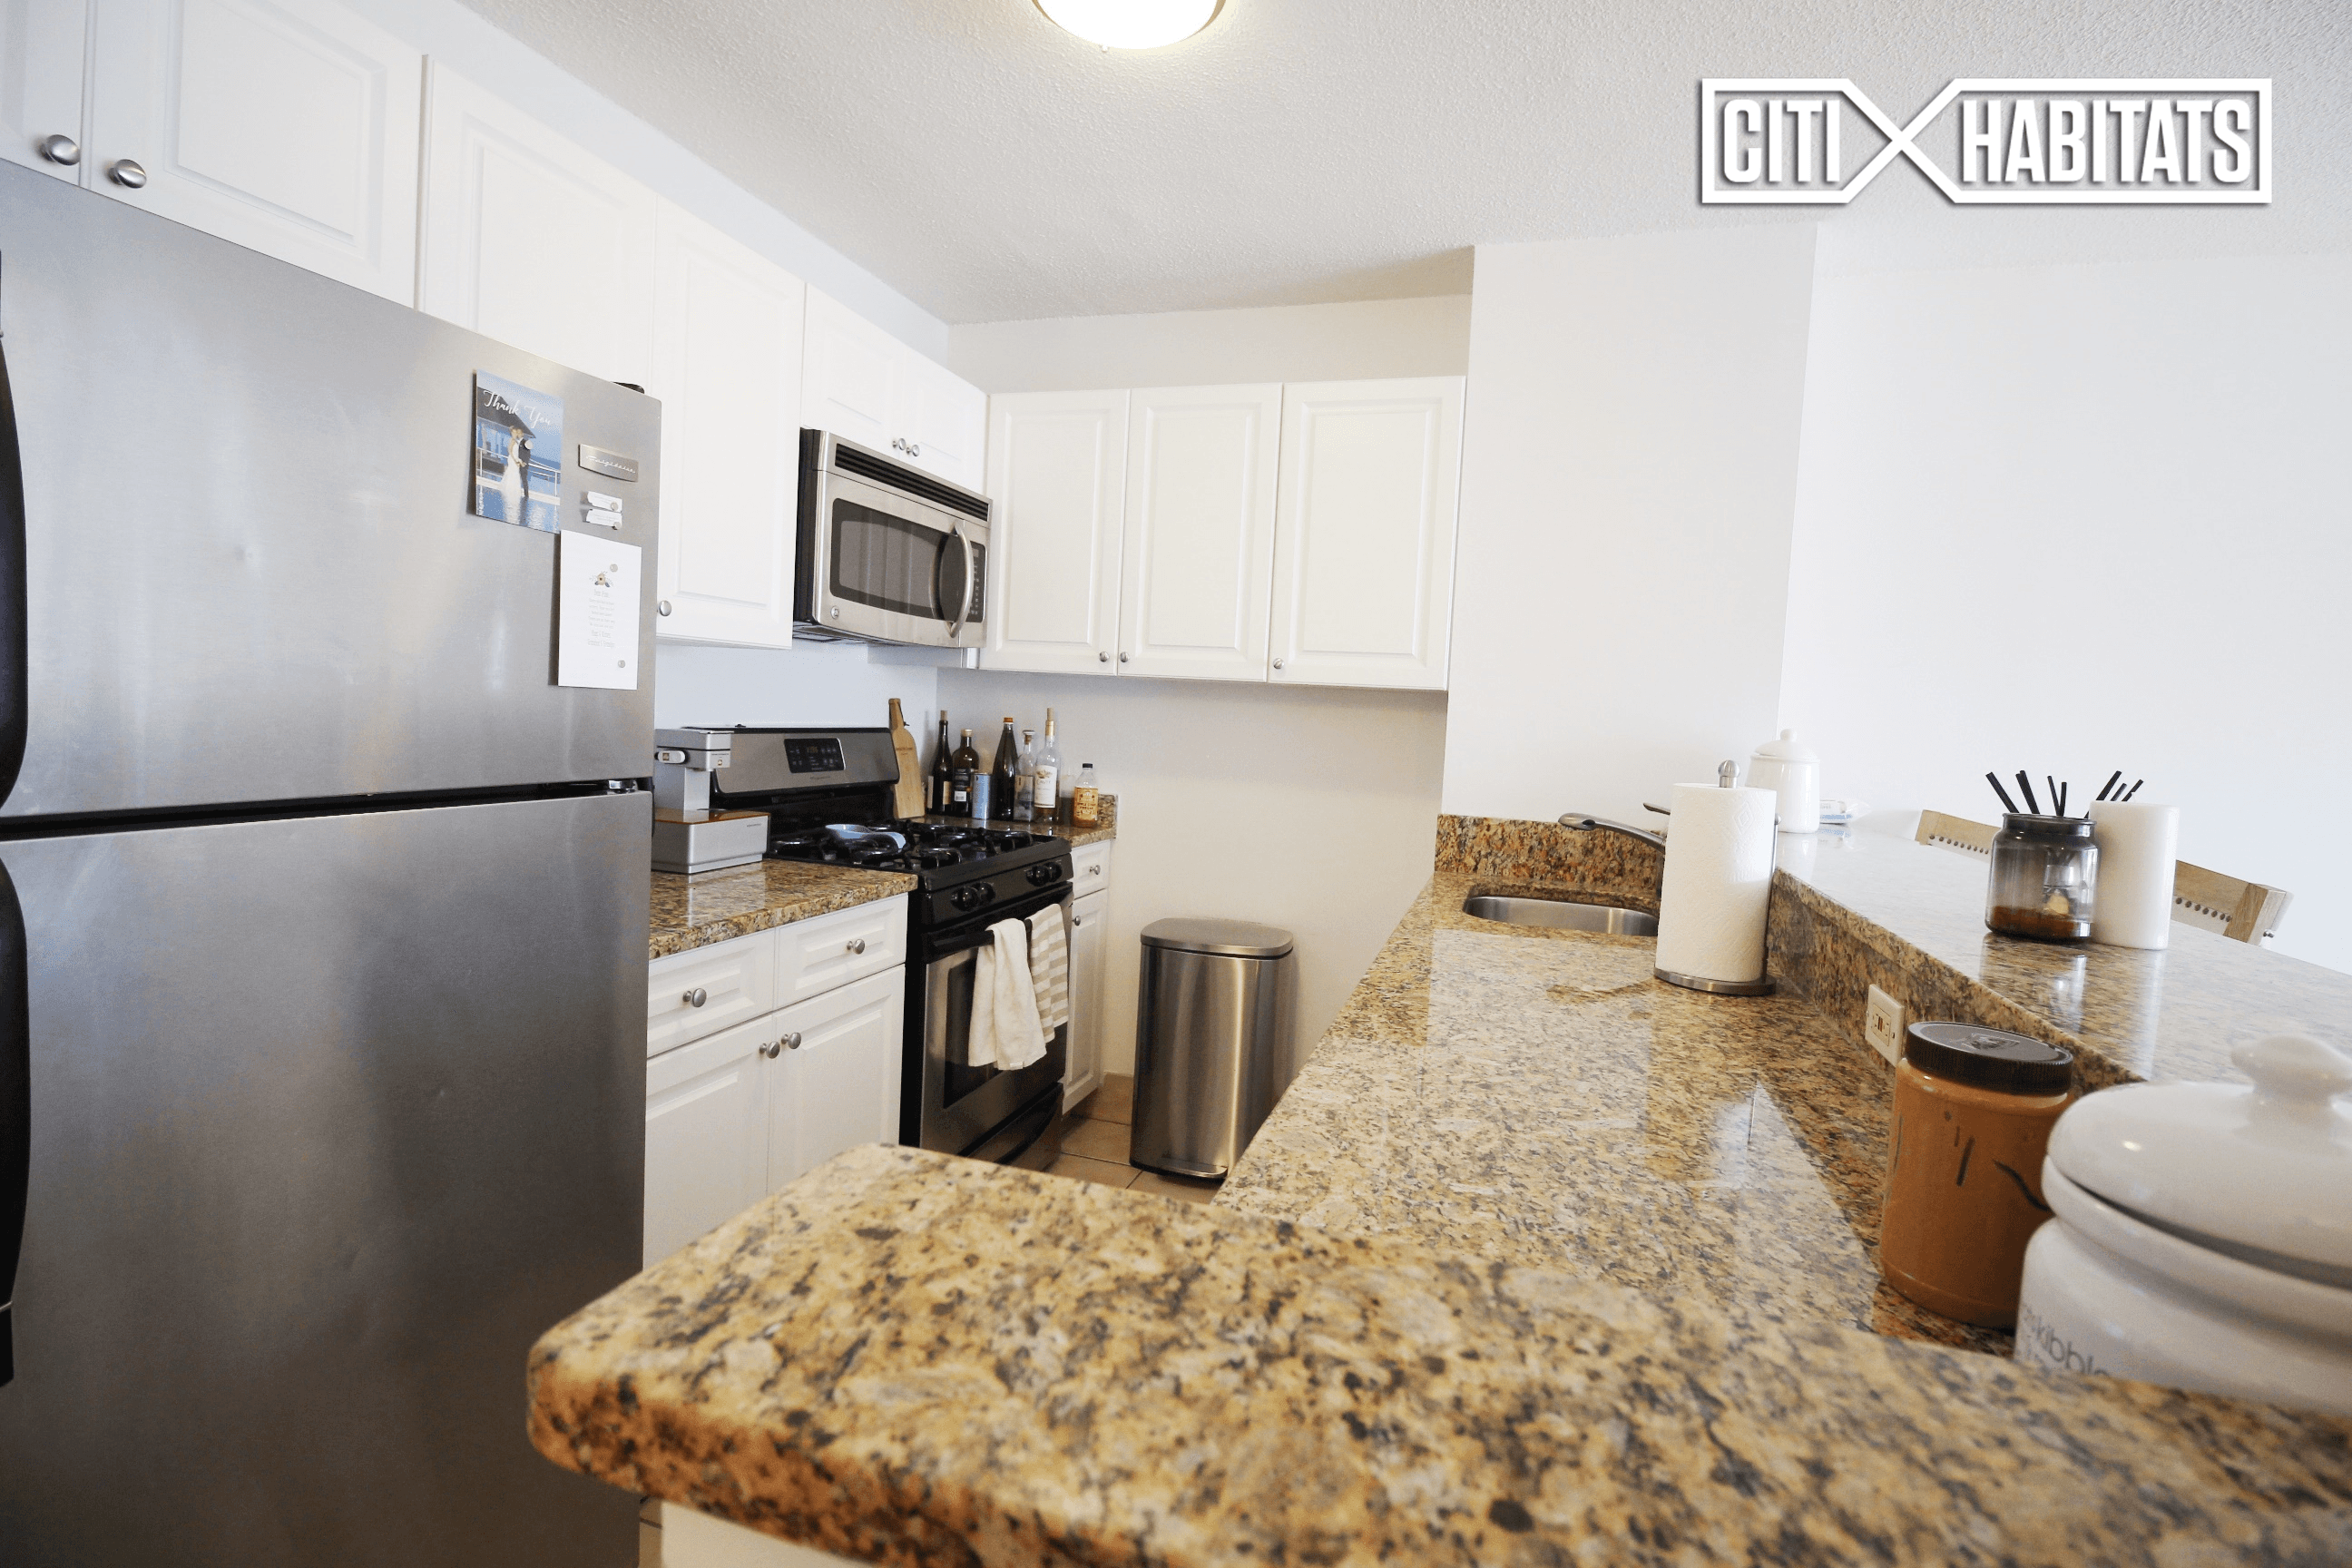 Rent Stabilized ! True 2 bedroom convertible 3 bedroom with 2 full bathrooms situated in a 24 Hour doorman building with laundry, fitness center, and a roof deck.